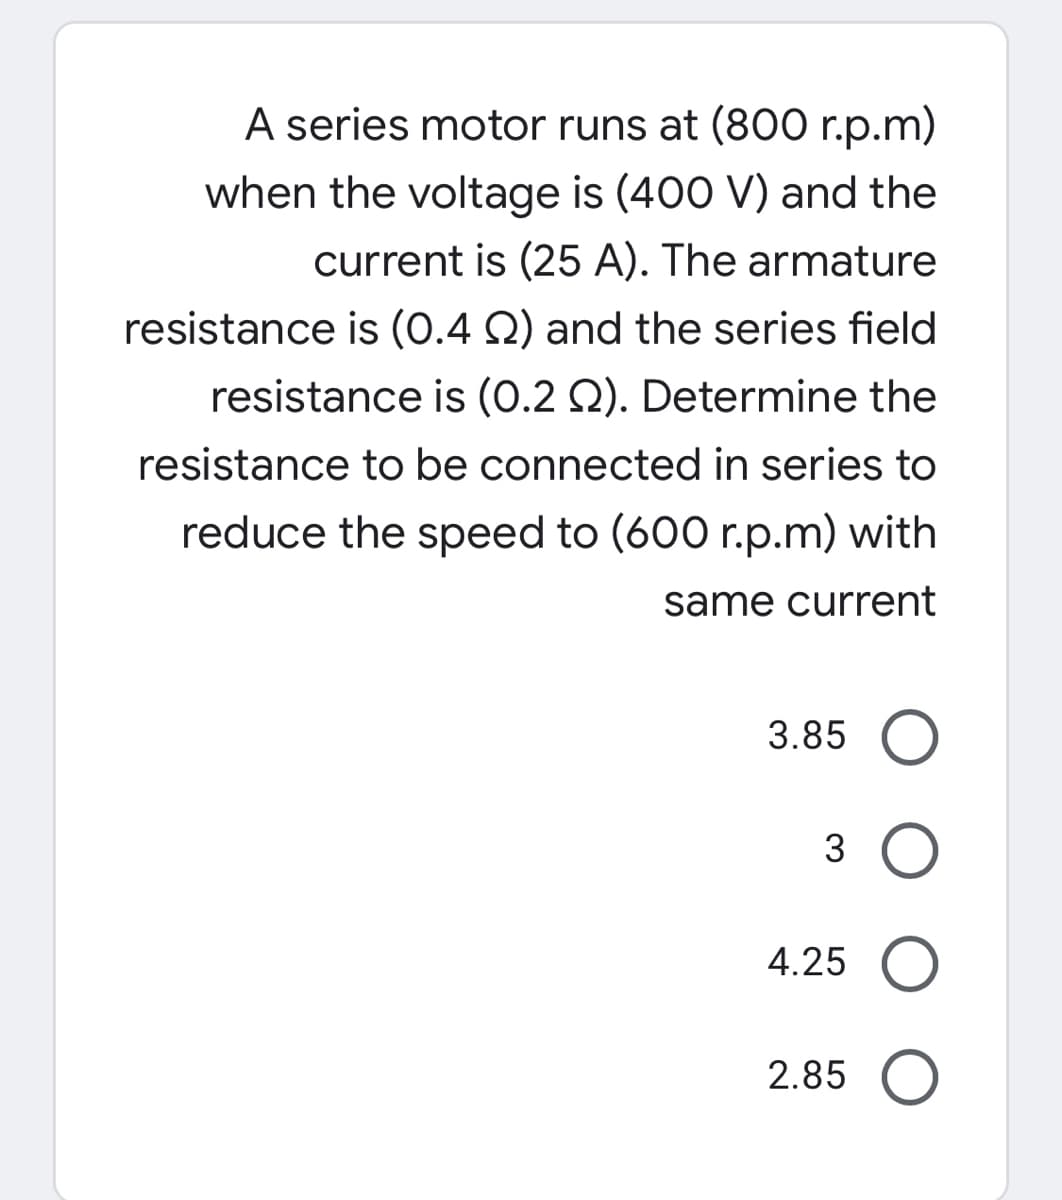 A series motor runs at (800 r.p.m)
when the voltage is (400 V) and the
current is (25 A). The armature
resistance is (0.4 Q) and the series field
resistance is (0.2 Q). Determine the
resistance to be connected in series to
reduce the speed to (600 r.p.m) with
same current
3.85 O
3 O
4.25 O
2.85 O
